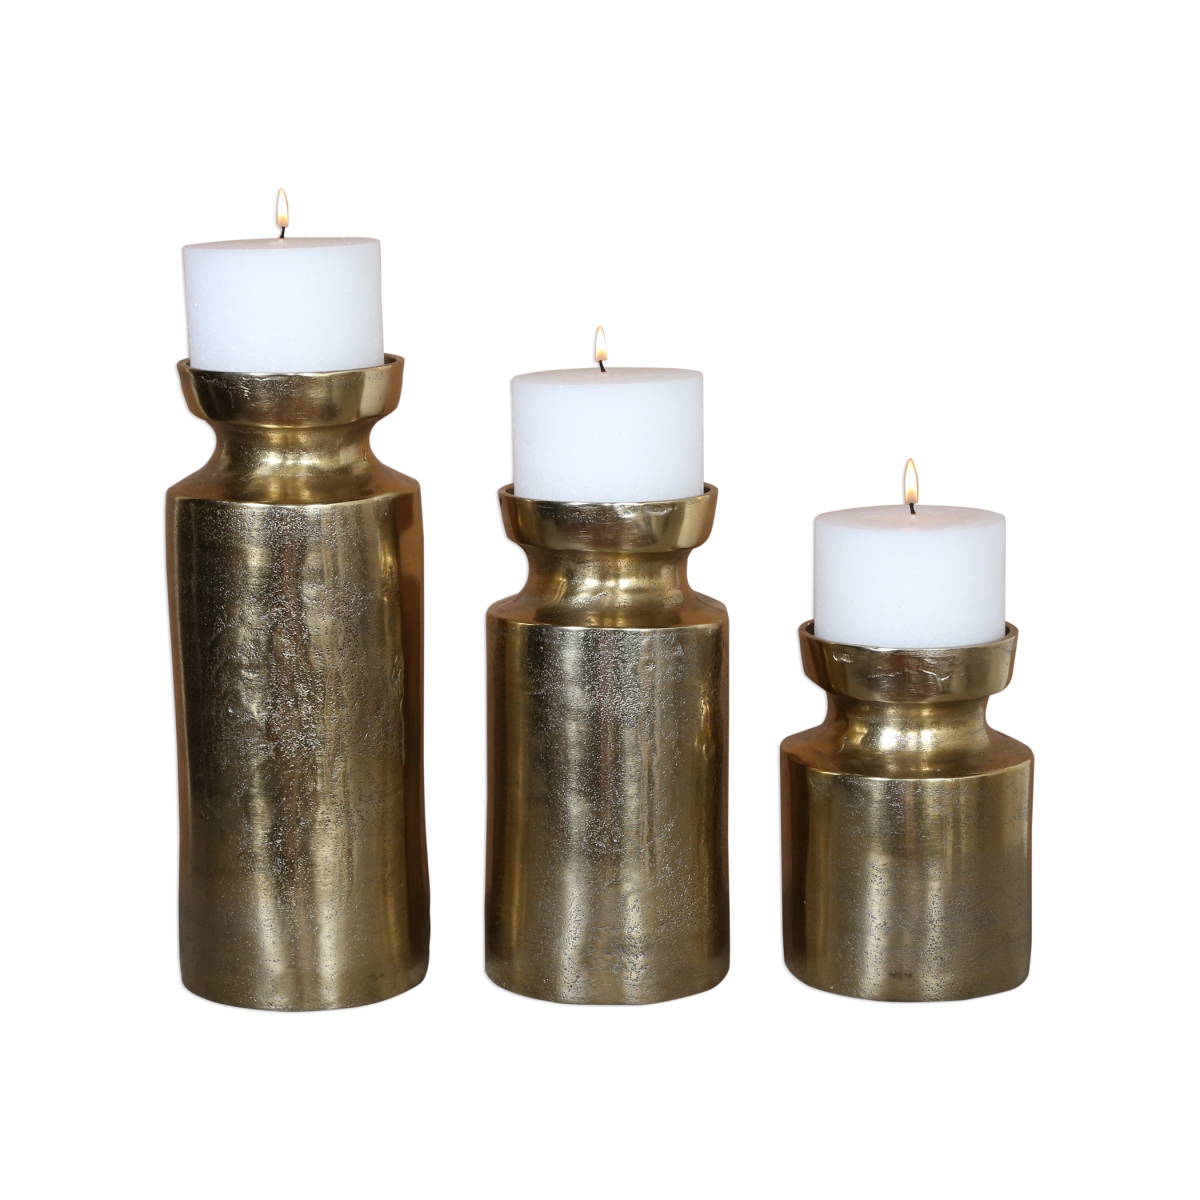 Picture of 212 Main 18958 Amina Antique Brass Candleholders - Set of 3